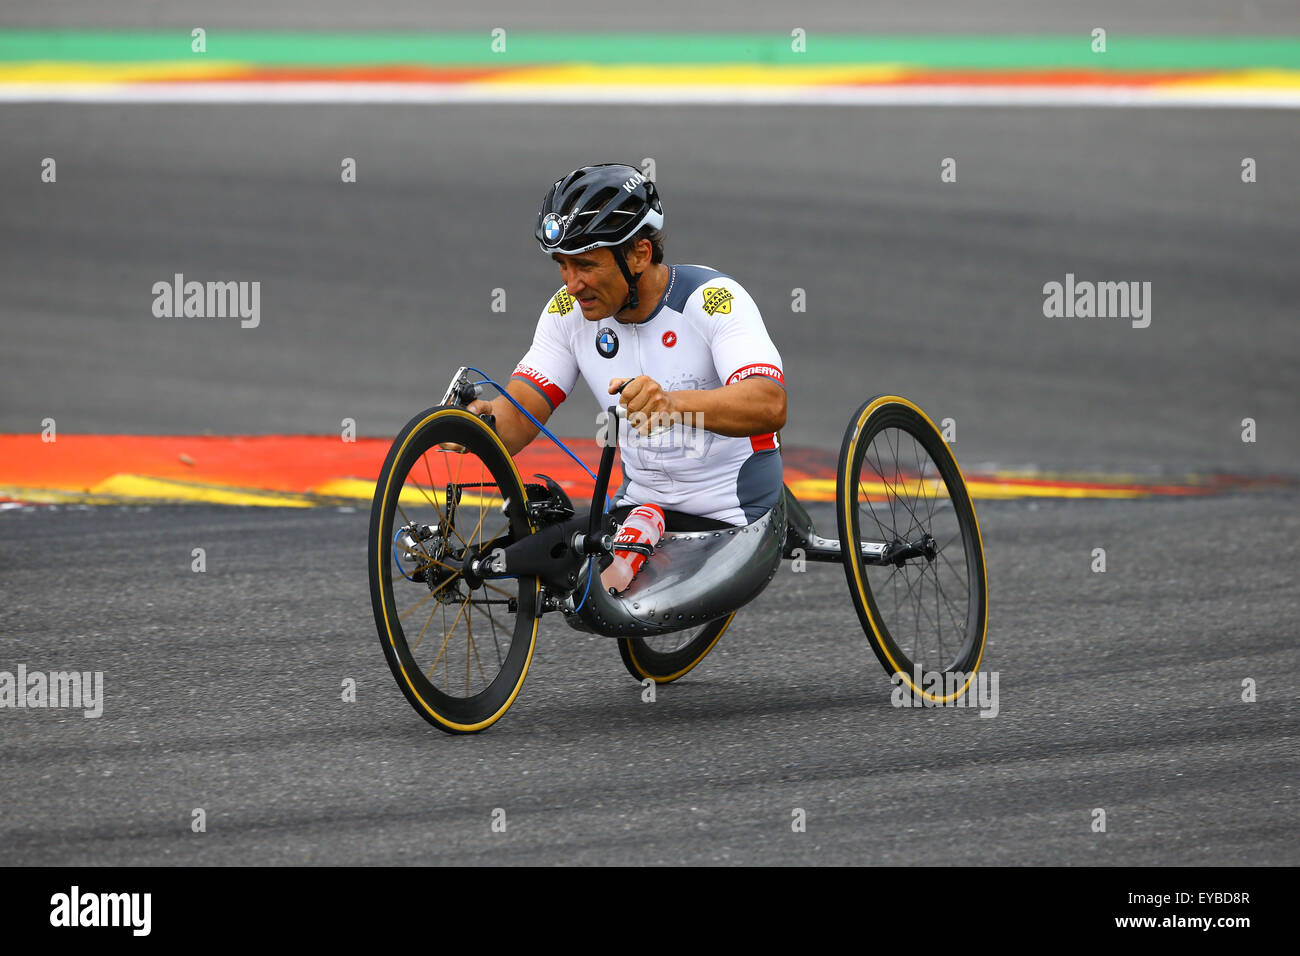 Spa Francorchamps, France. 24th July, 2015. A specially adapted hand-driven bike is demonstrated by Alex Zanardi, who raced against Timo Glock on a regular racing bike. © Action Plus Sports/Alamy Live News Stock Photo